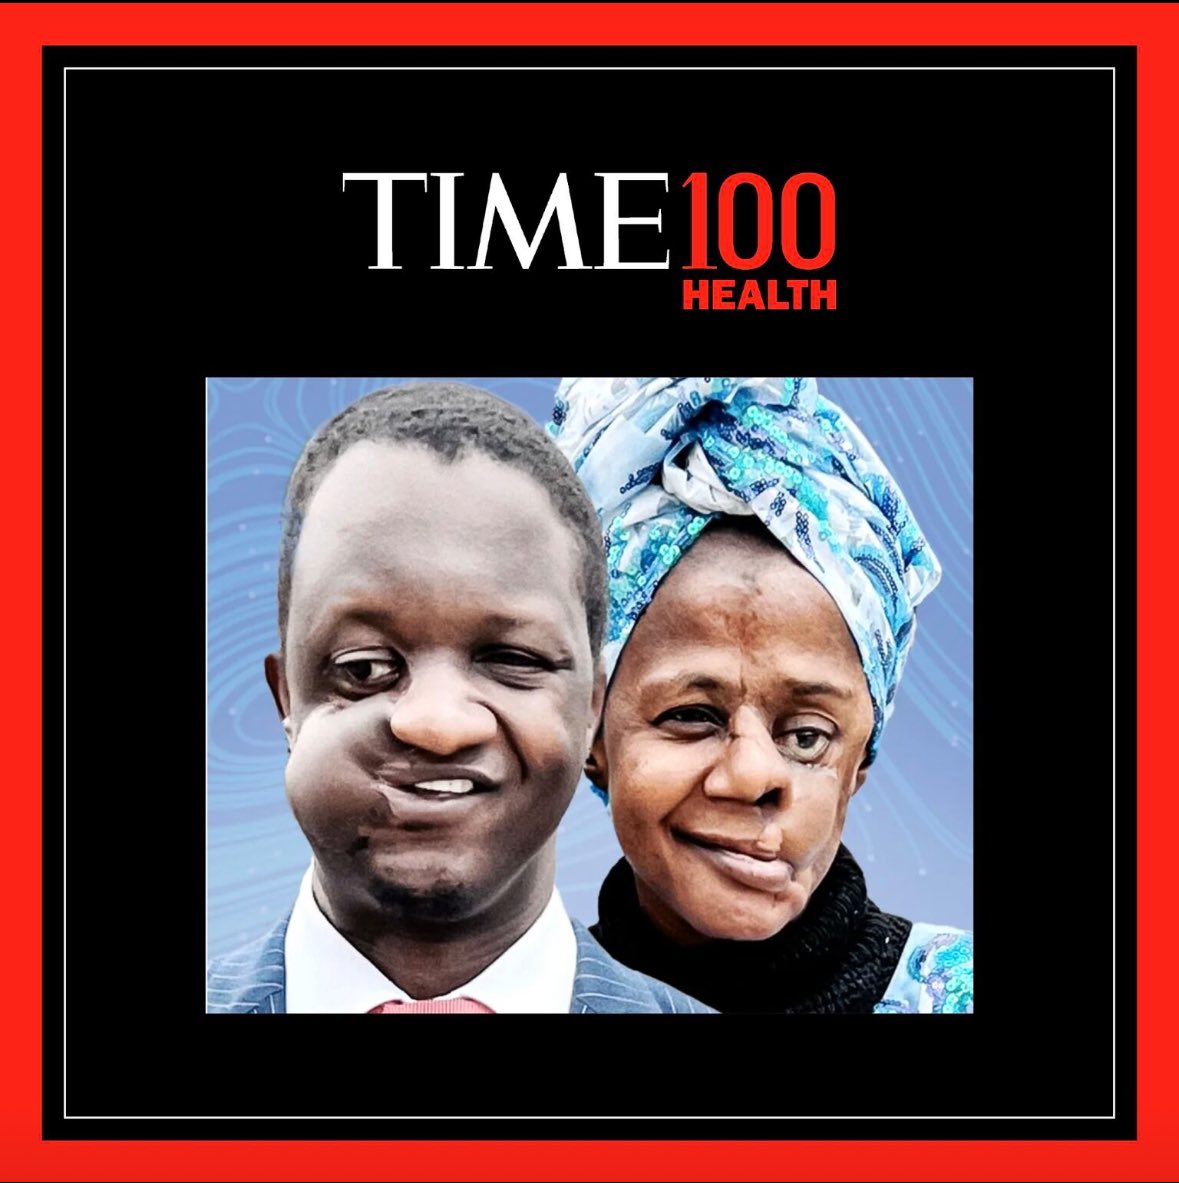 TIME's list of the 100 Most Influential People in global health is out today. It’s absolutely amazing that Mulikat Okanlawon and Fidel Strub are a part of this group. Indeed a great privilege to have been involved with the NOMA initiative since MSF took over from the DNF @MSF